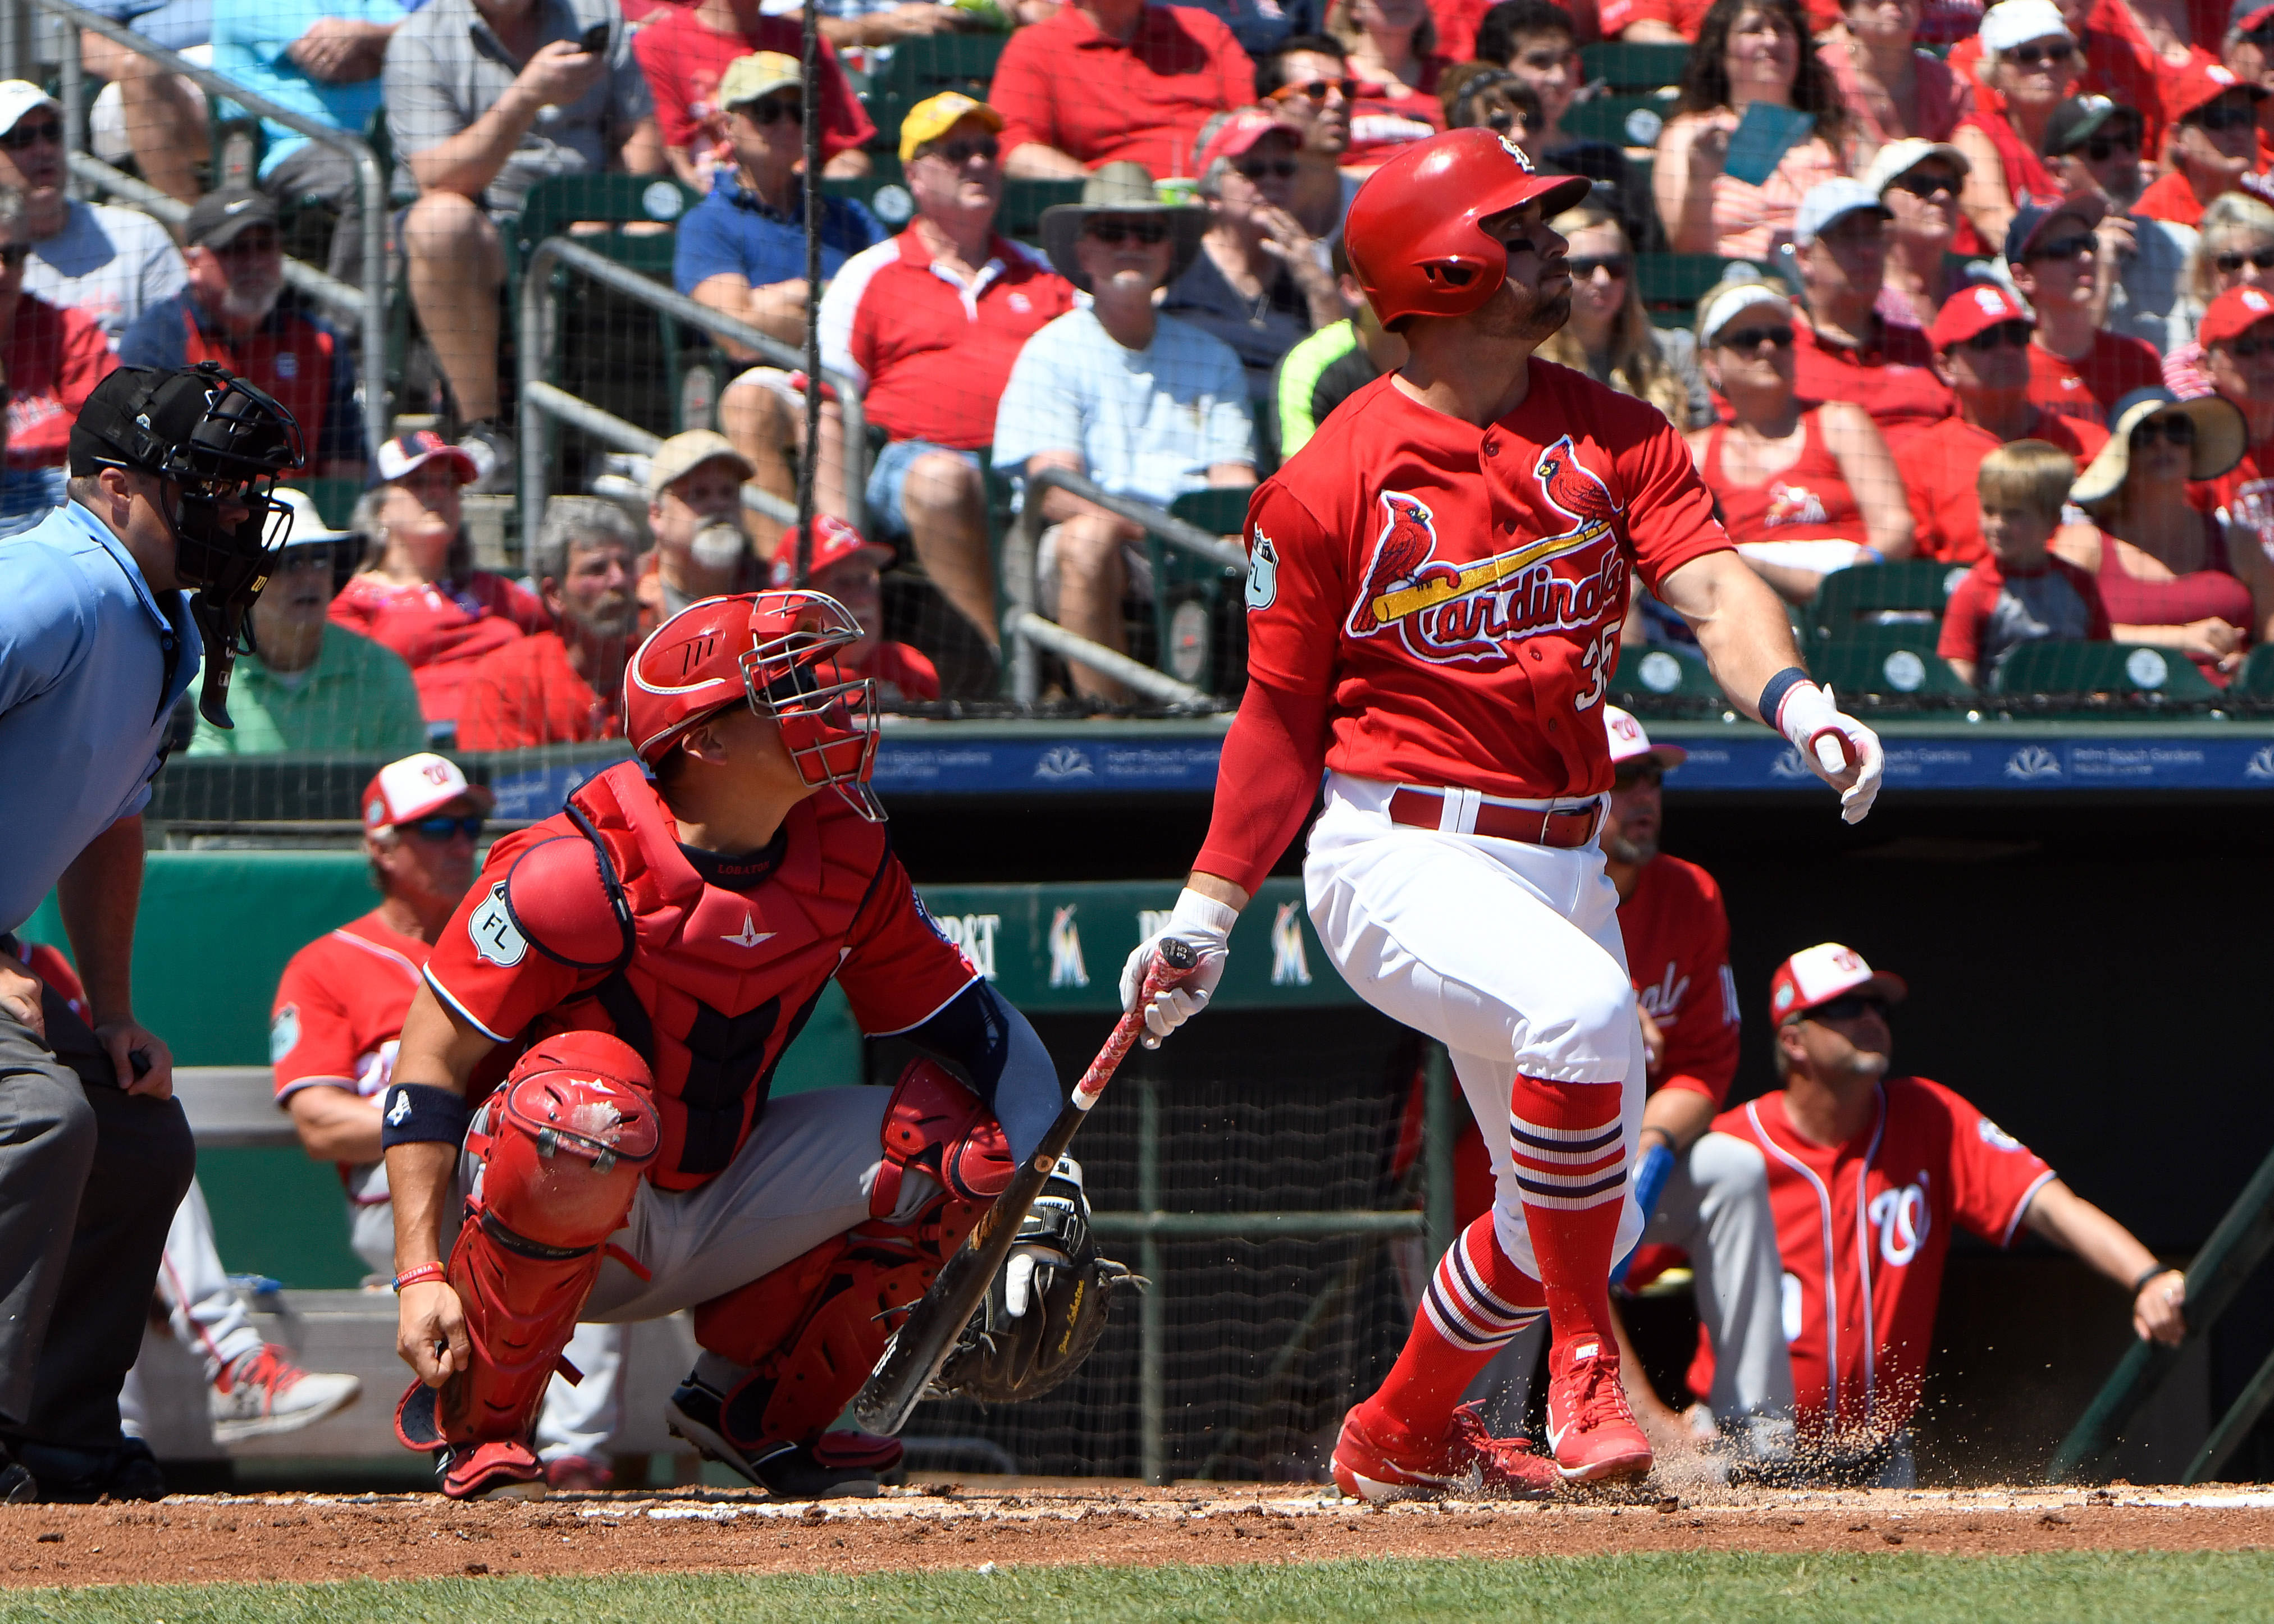 St. Louis Cardinals: Roster Positions Selected, Announced, and Are the Right Choices